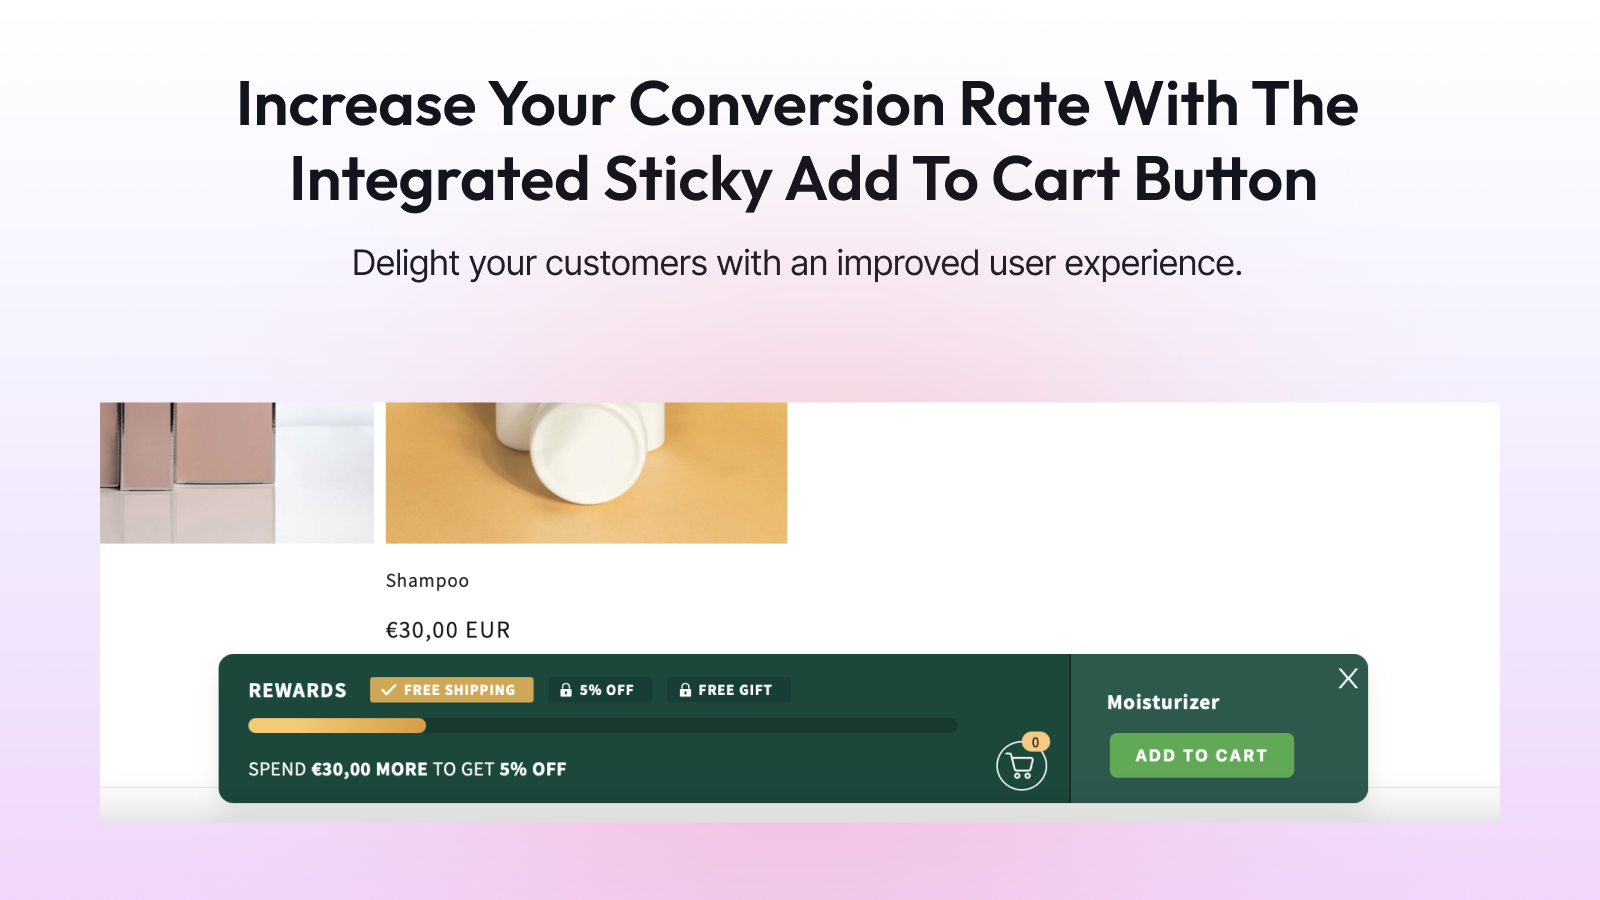 Integrated Sticky Add to Cart Button 